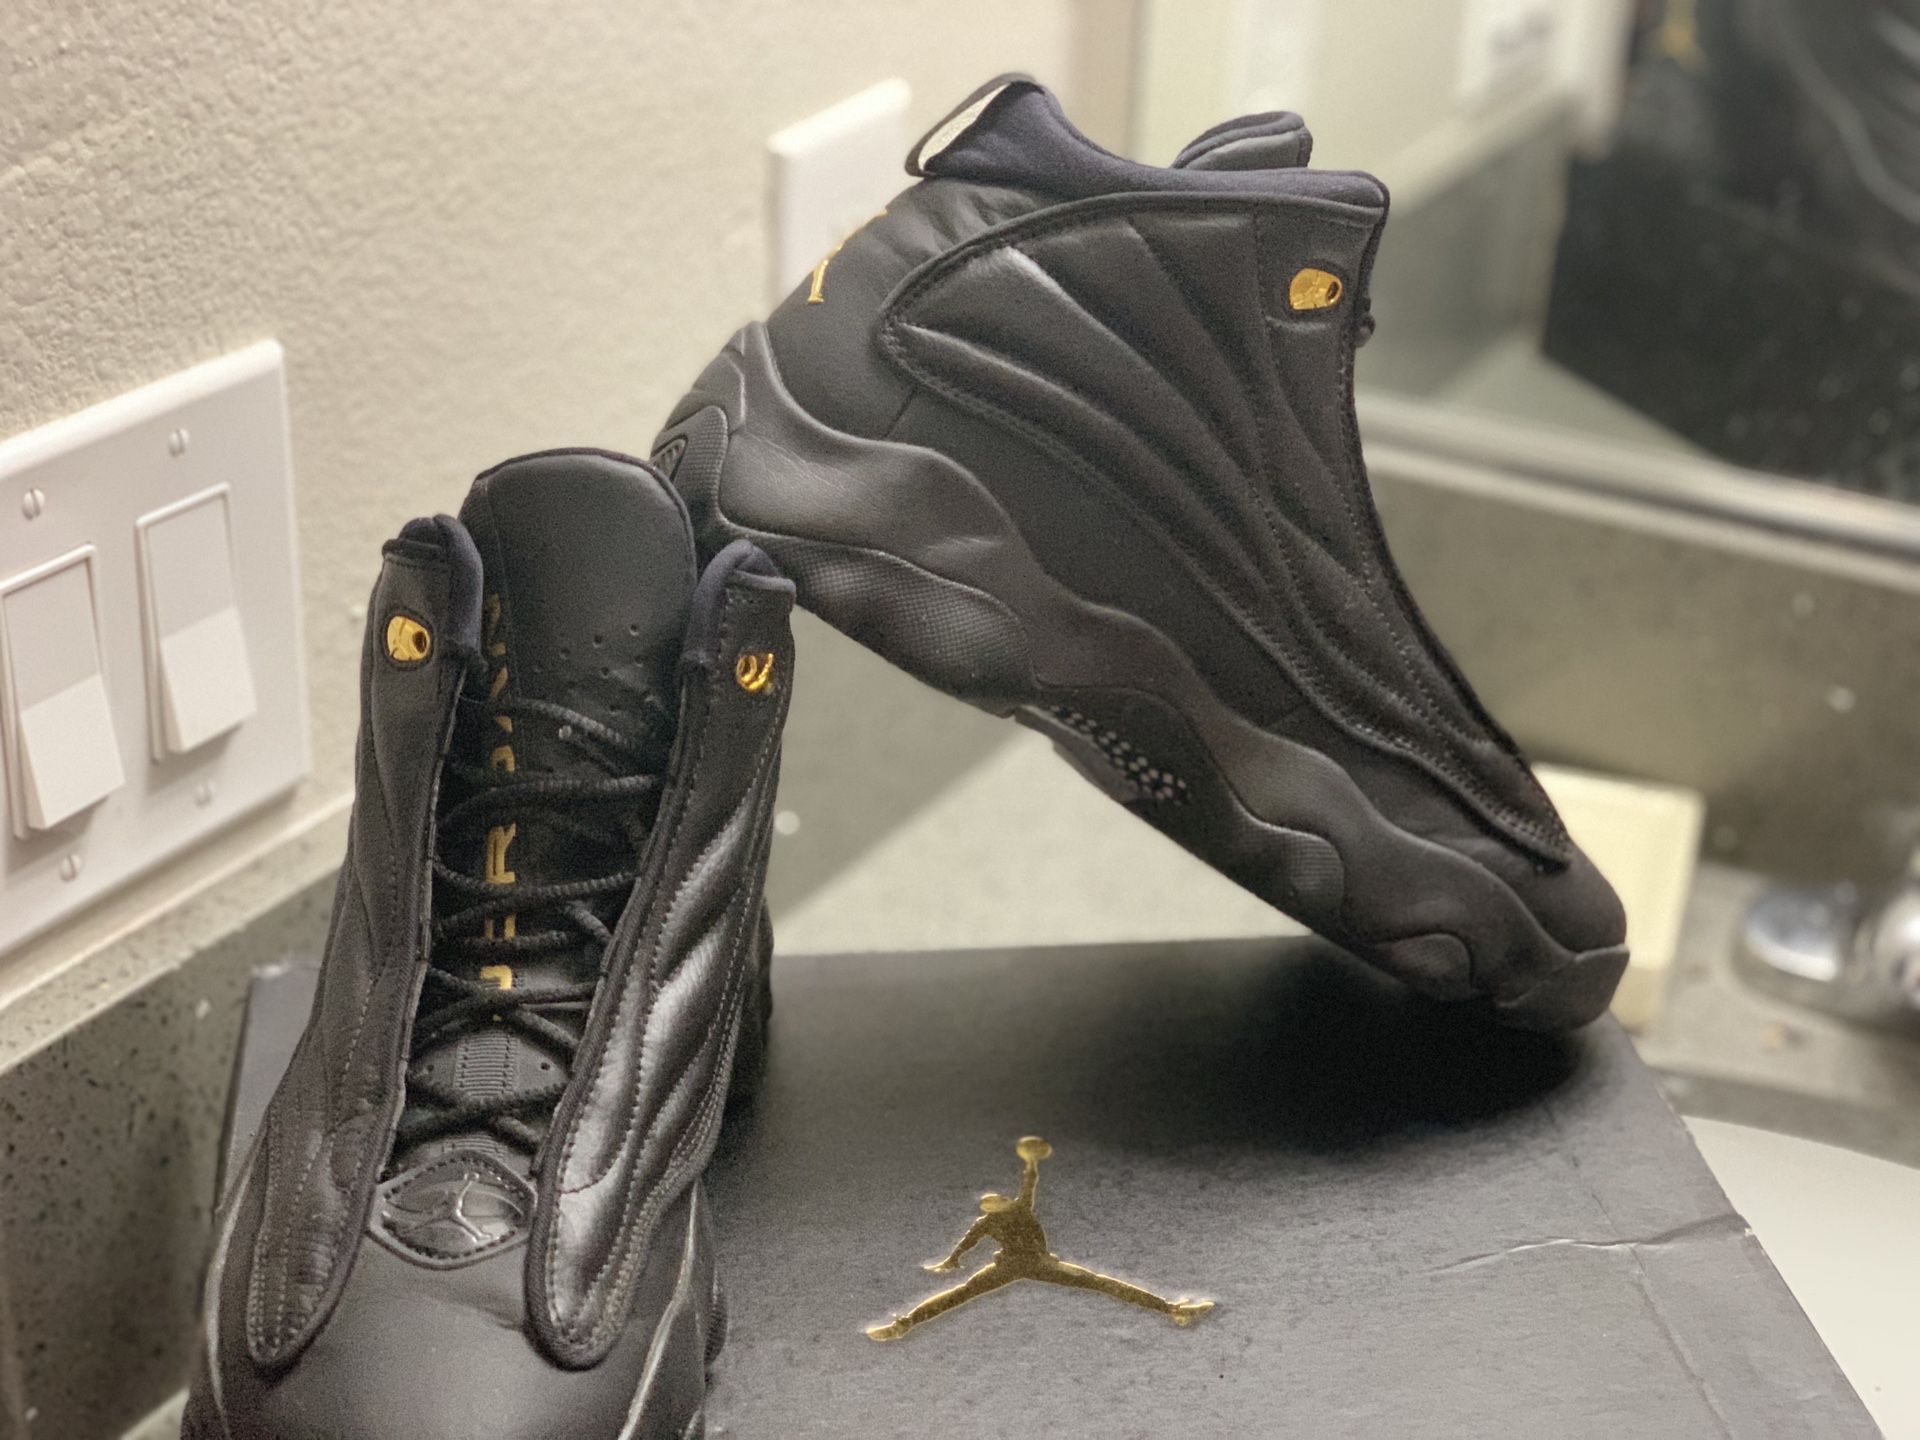 Limited editions black and gold jordan 13’s